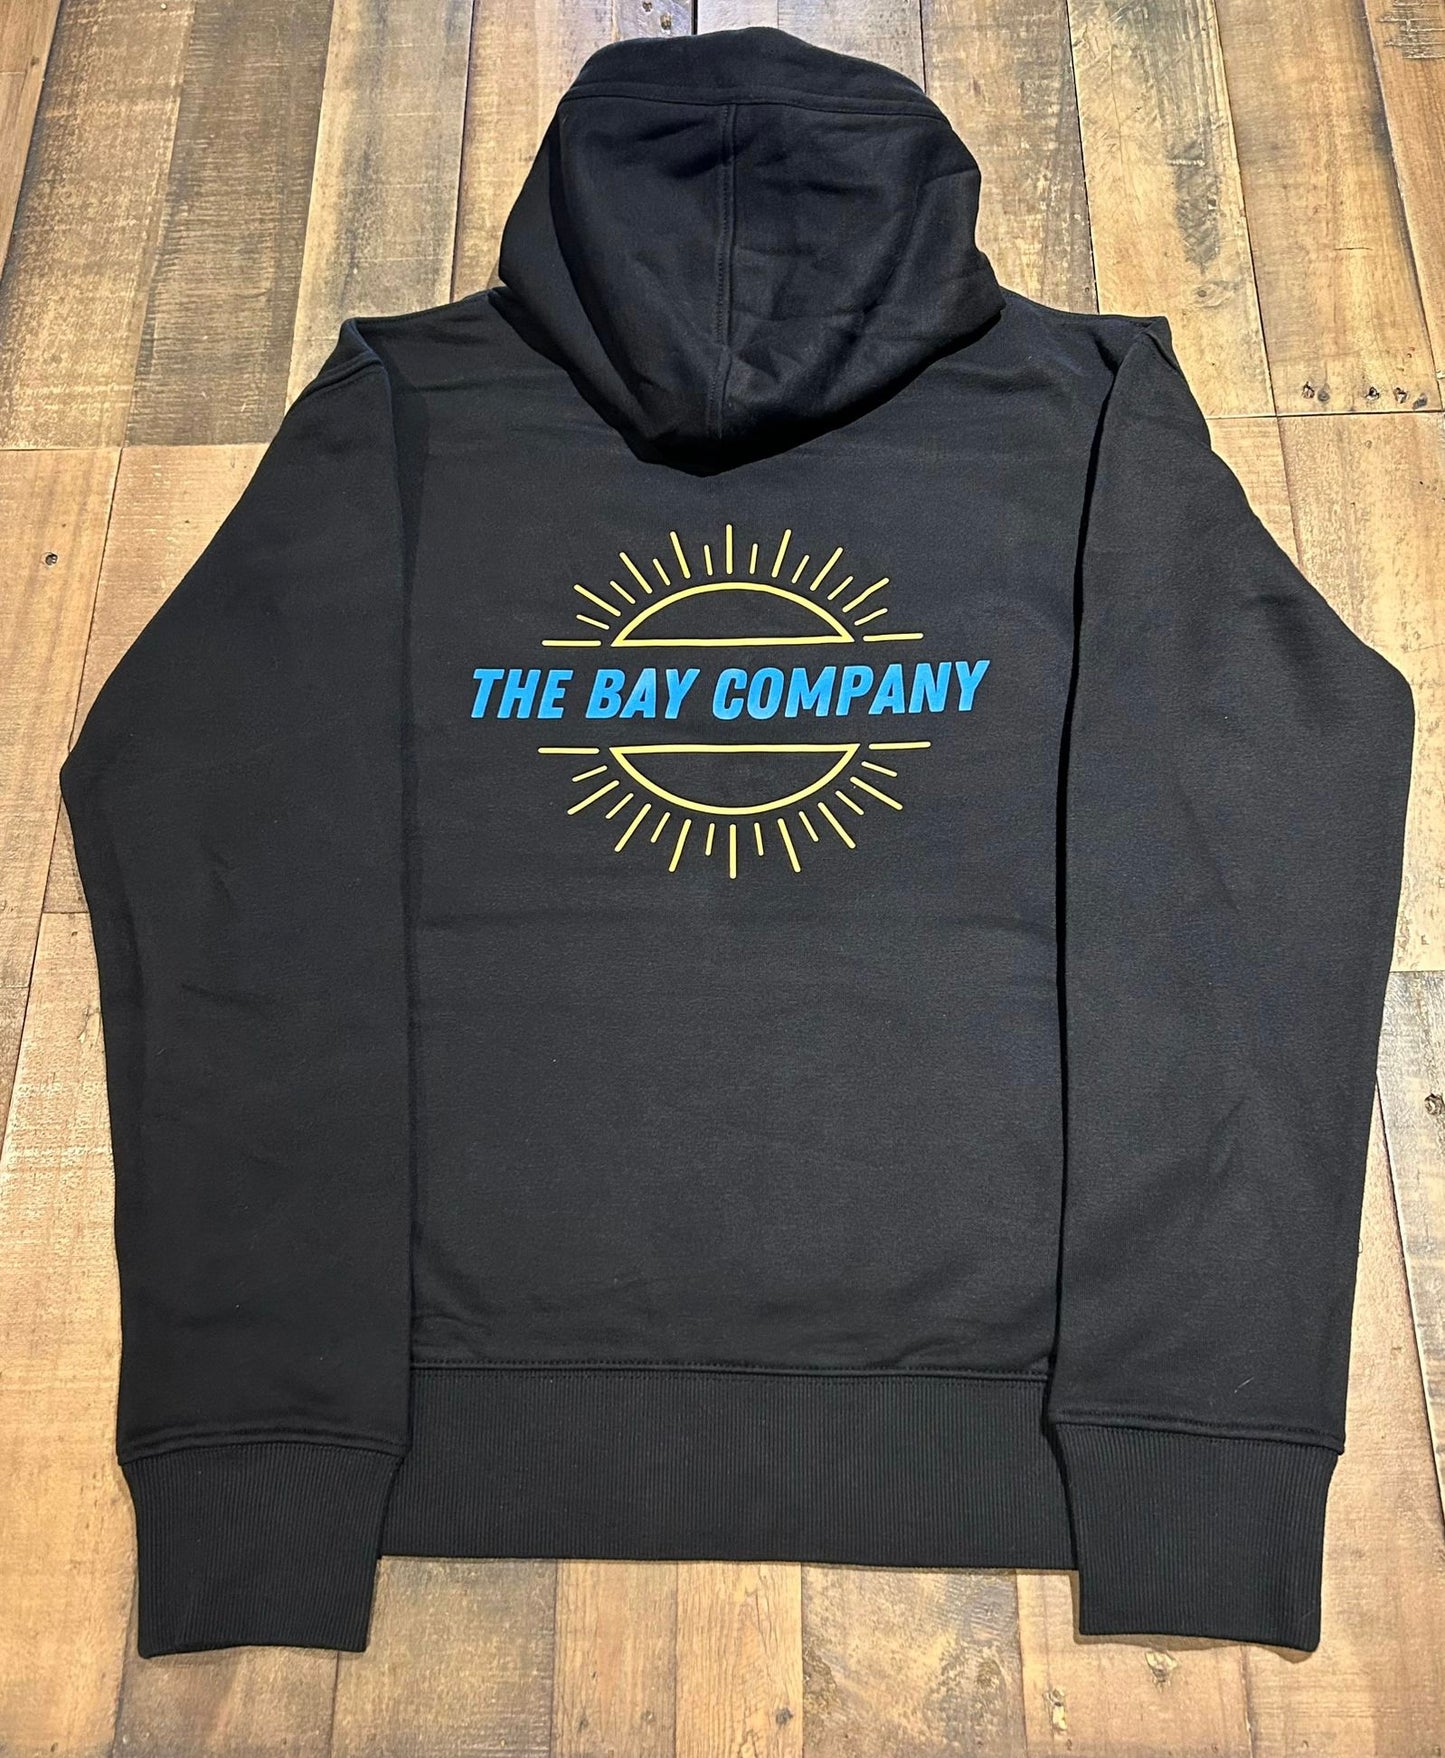 The black “The Bay Company” men’s hoodie. 